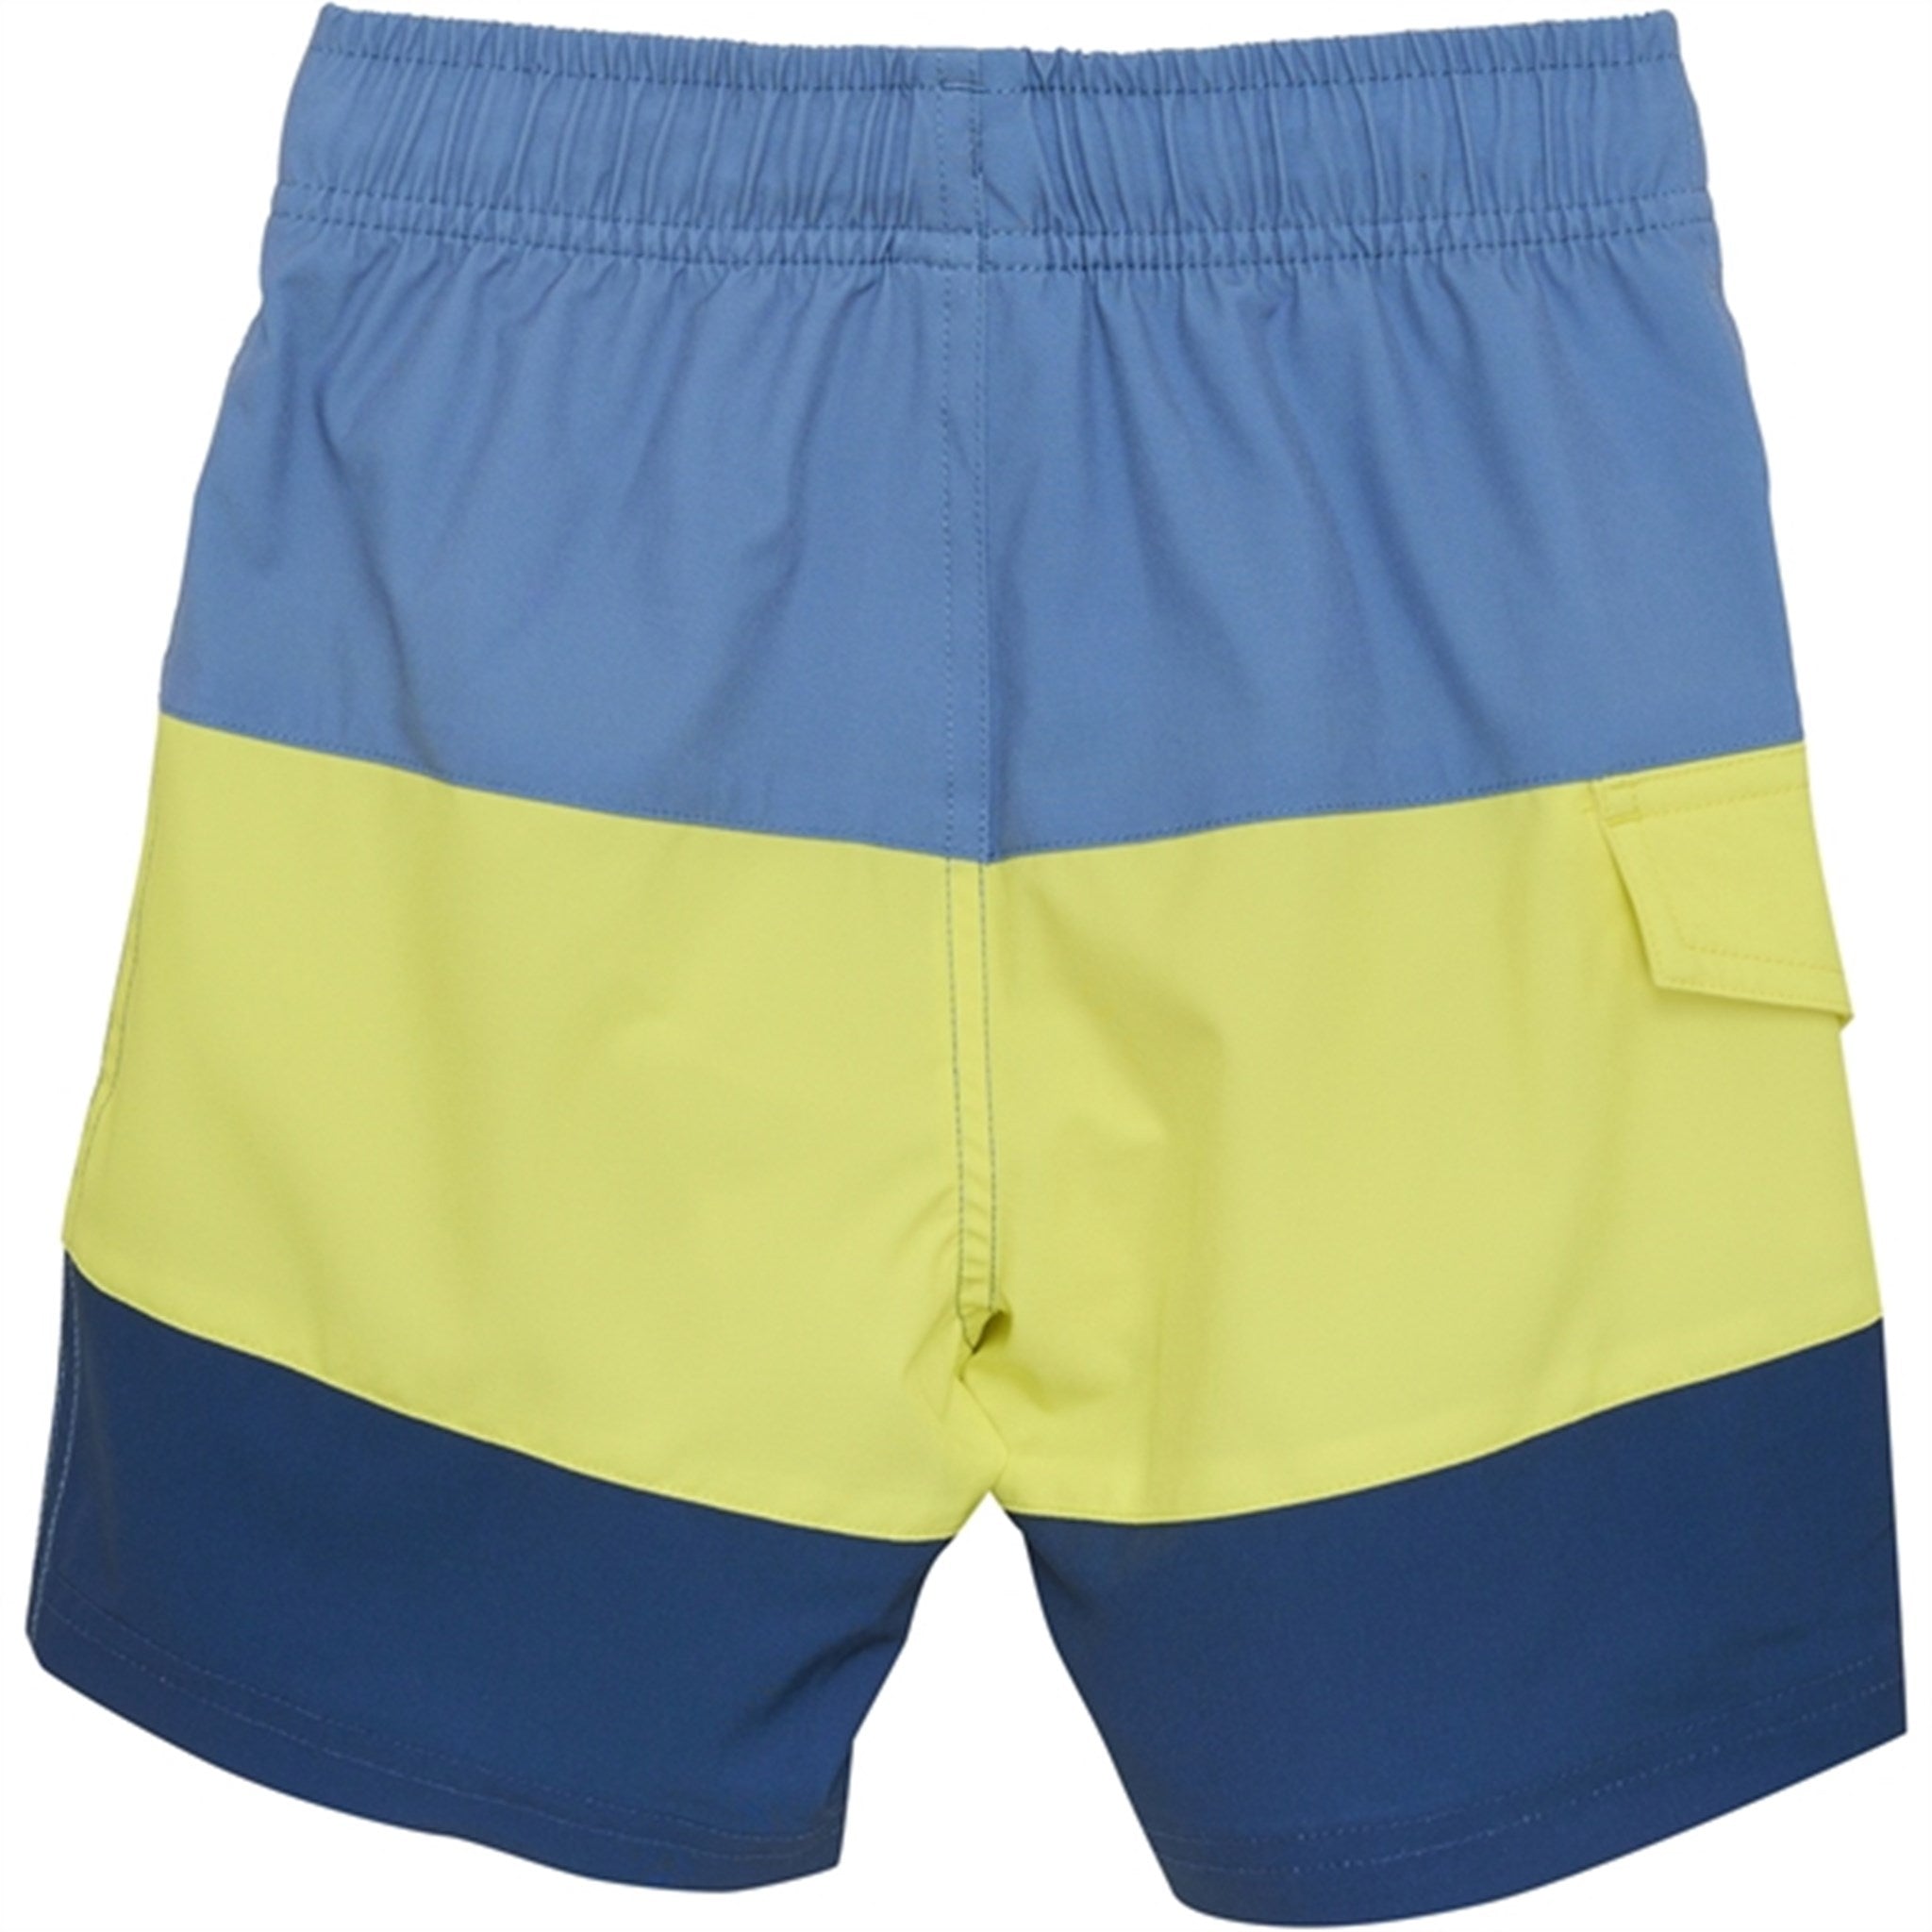 Color Kids Badeshorts Colorblock Limelight 3